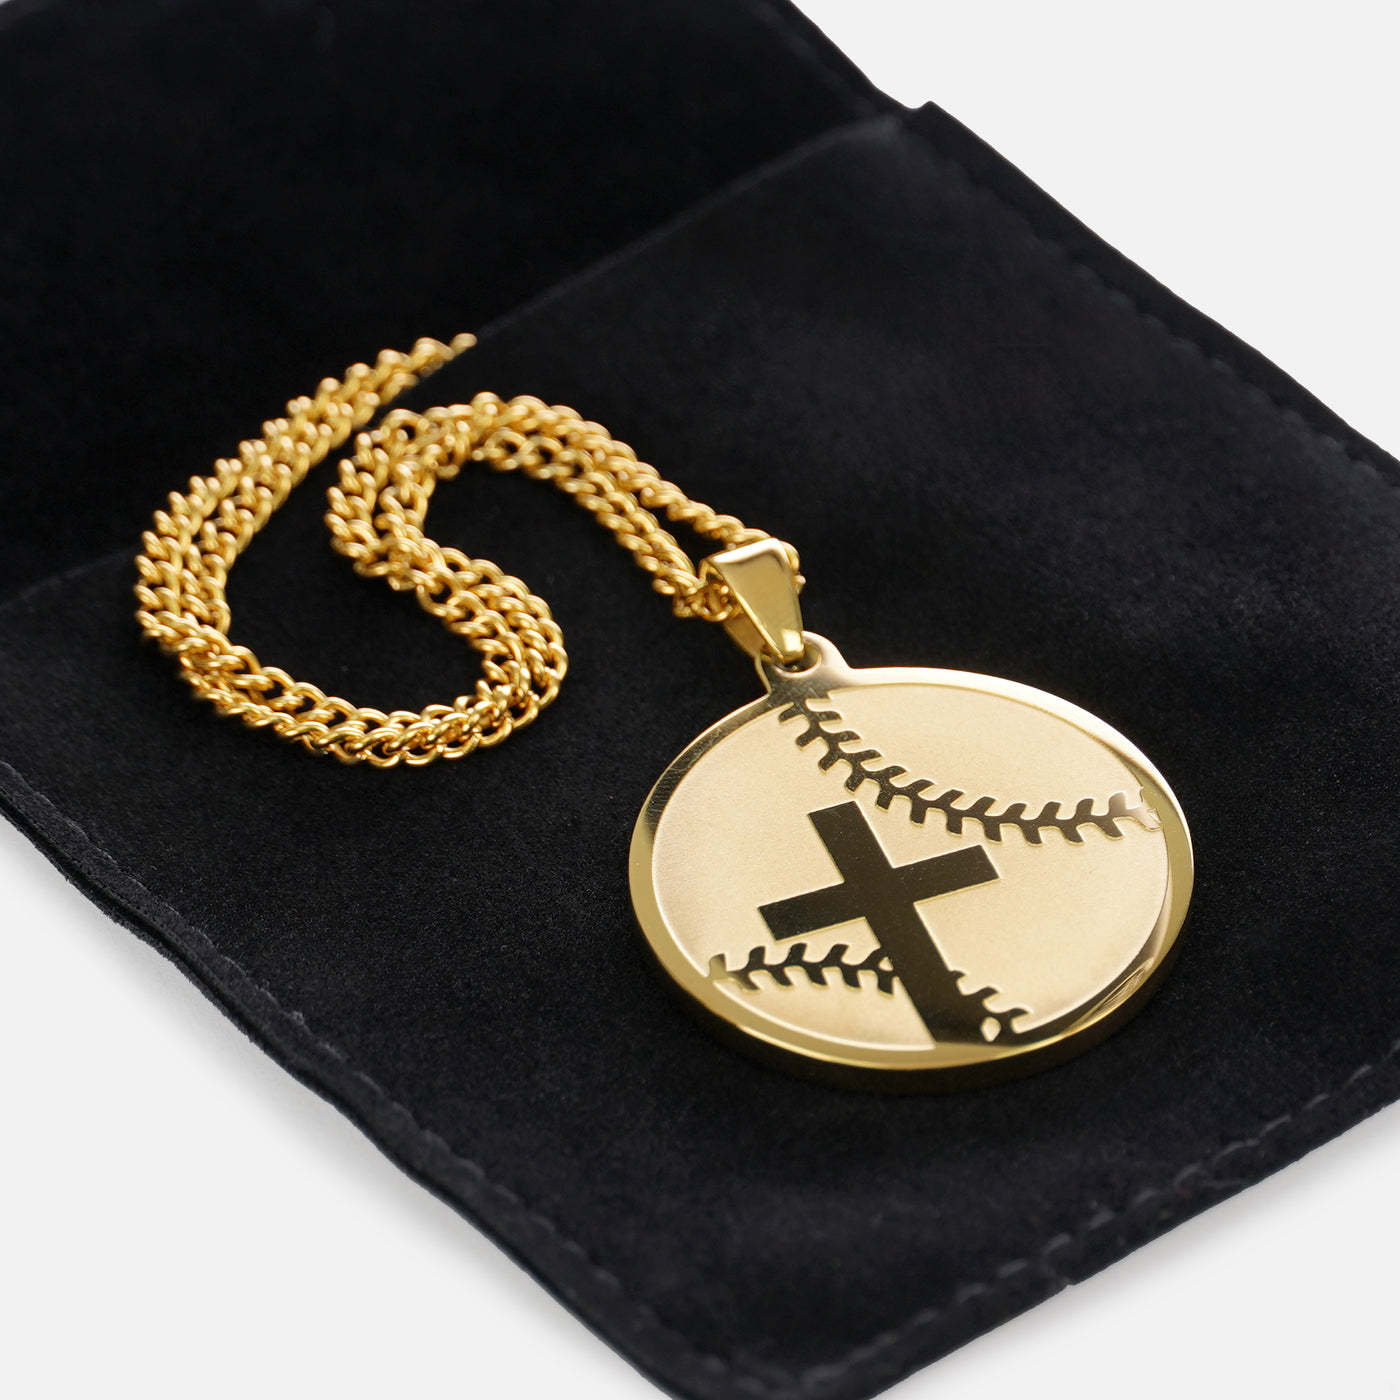 Baseball Faith Cross Pendant with Chain Necklace - Gold Plated Stainless Steel